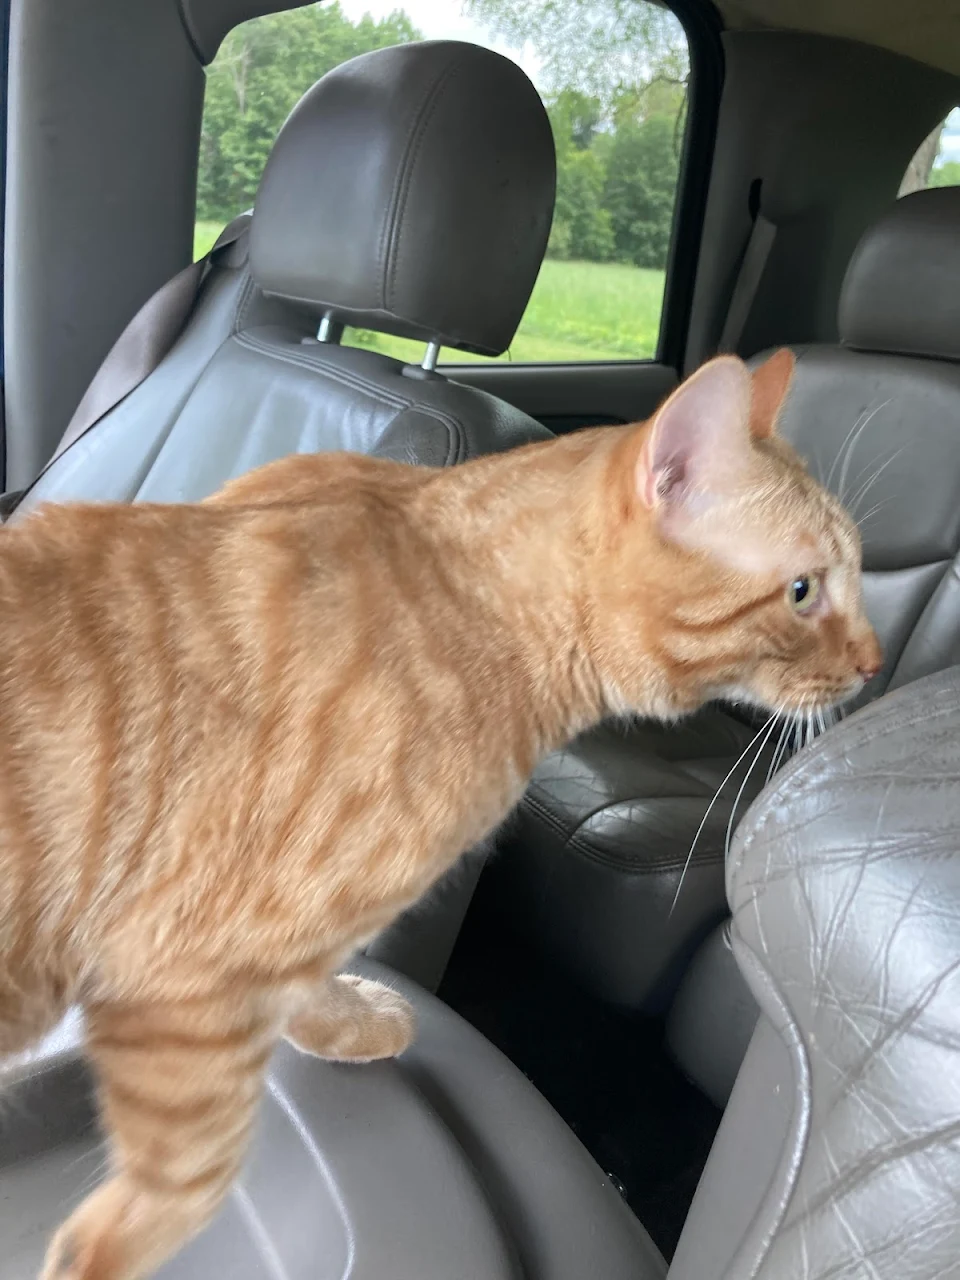 He does not like the car.